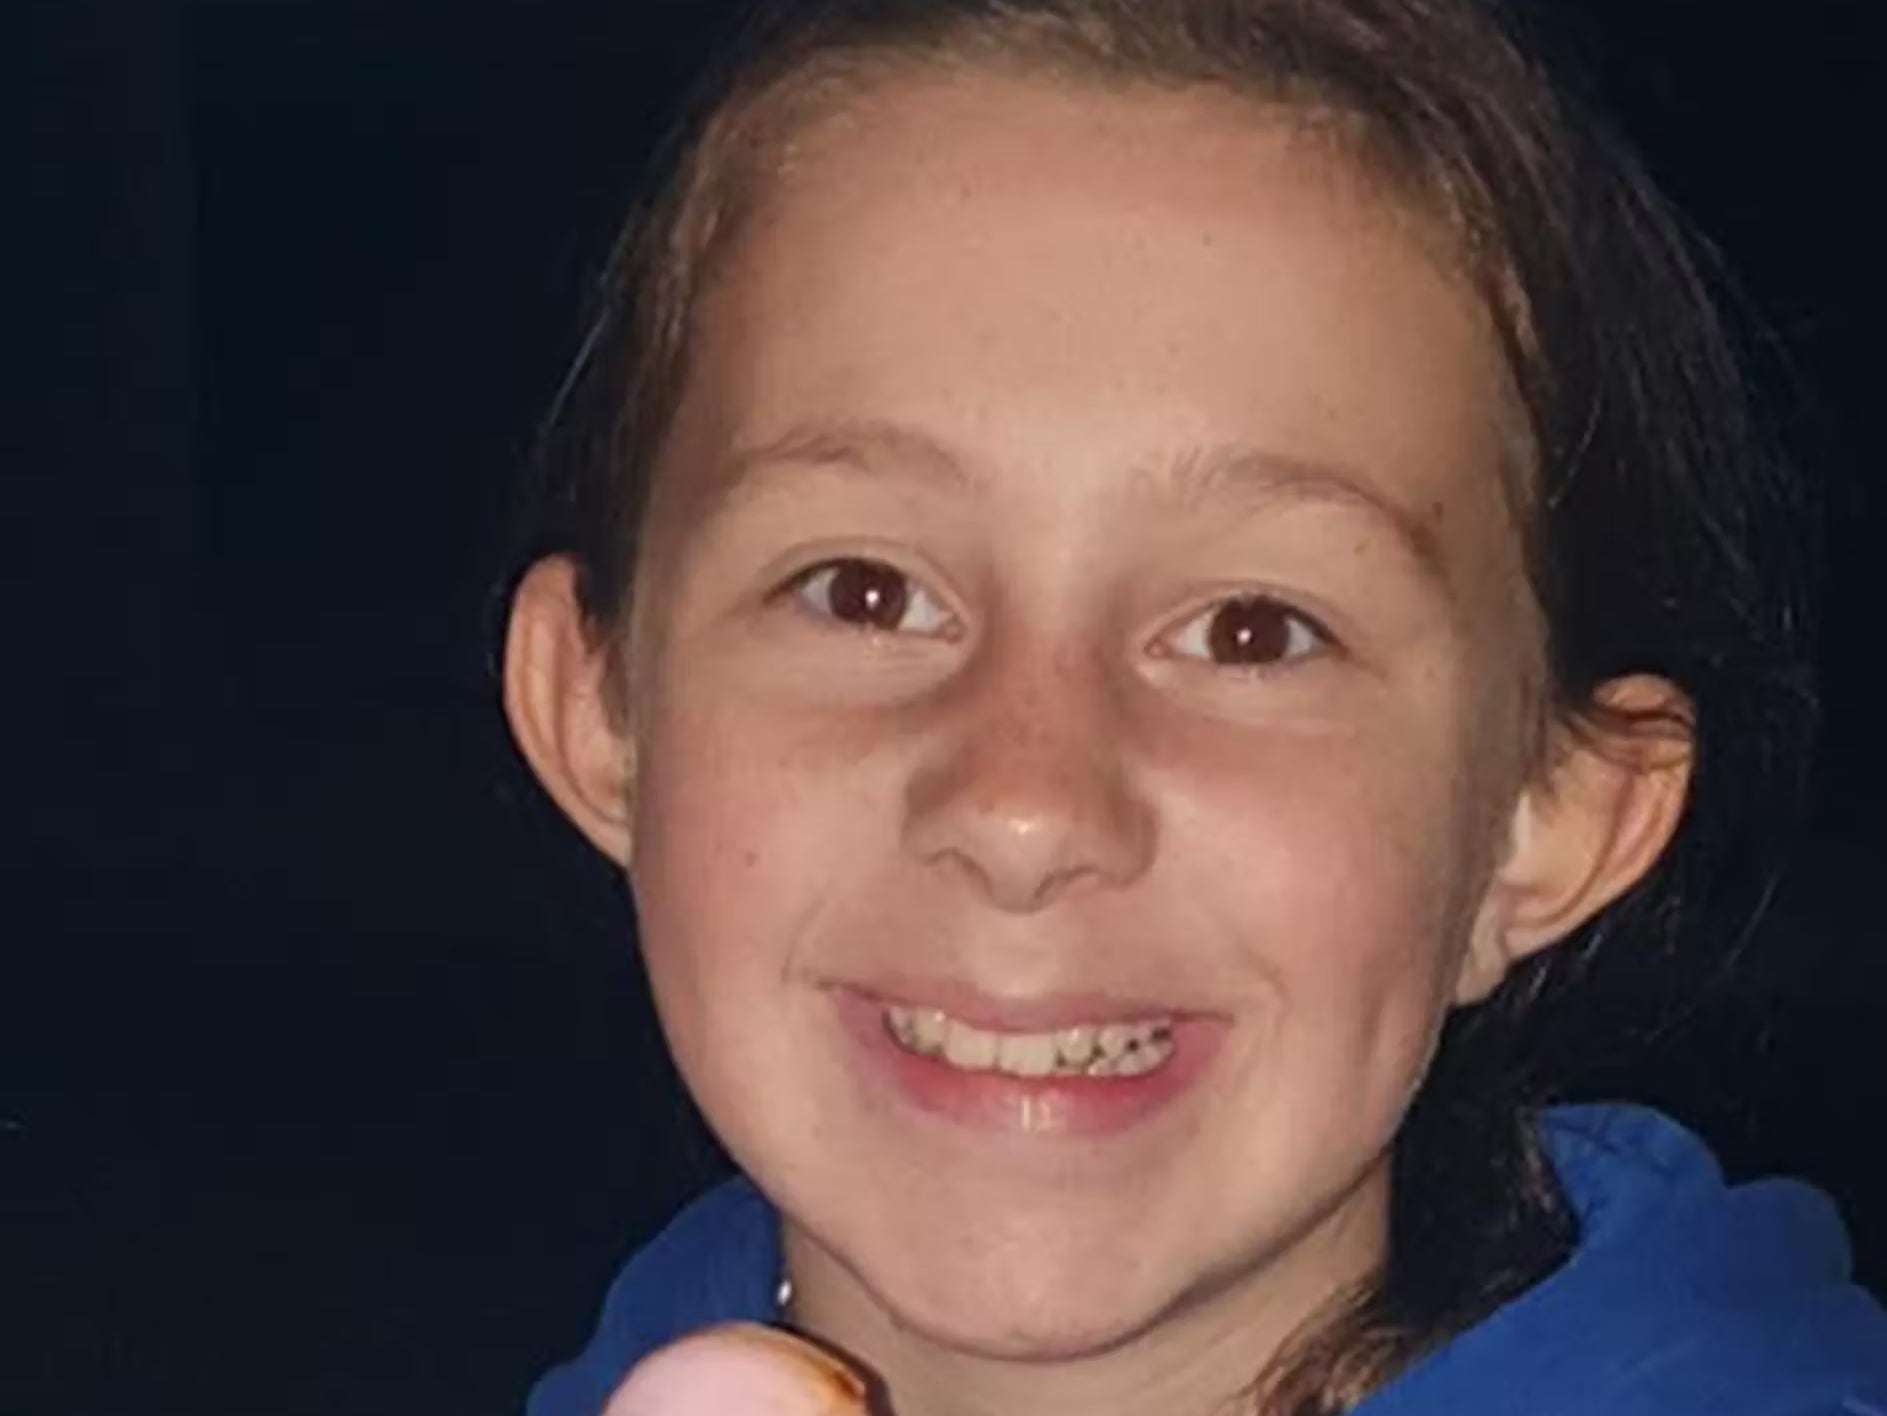 A 14-year-old boy told police he was playing computer games at the time 12-year-old Ava White was stabbed to death in Liverpool